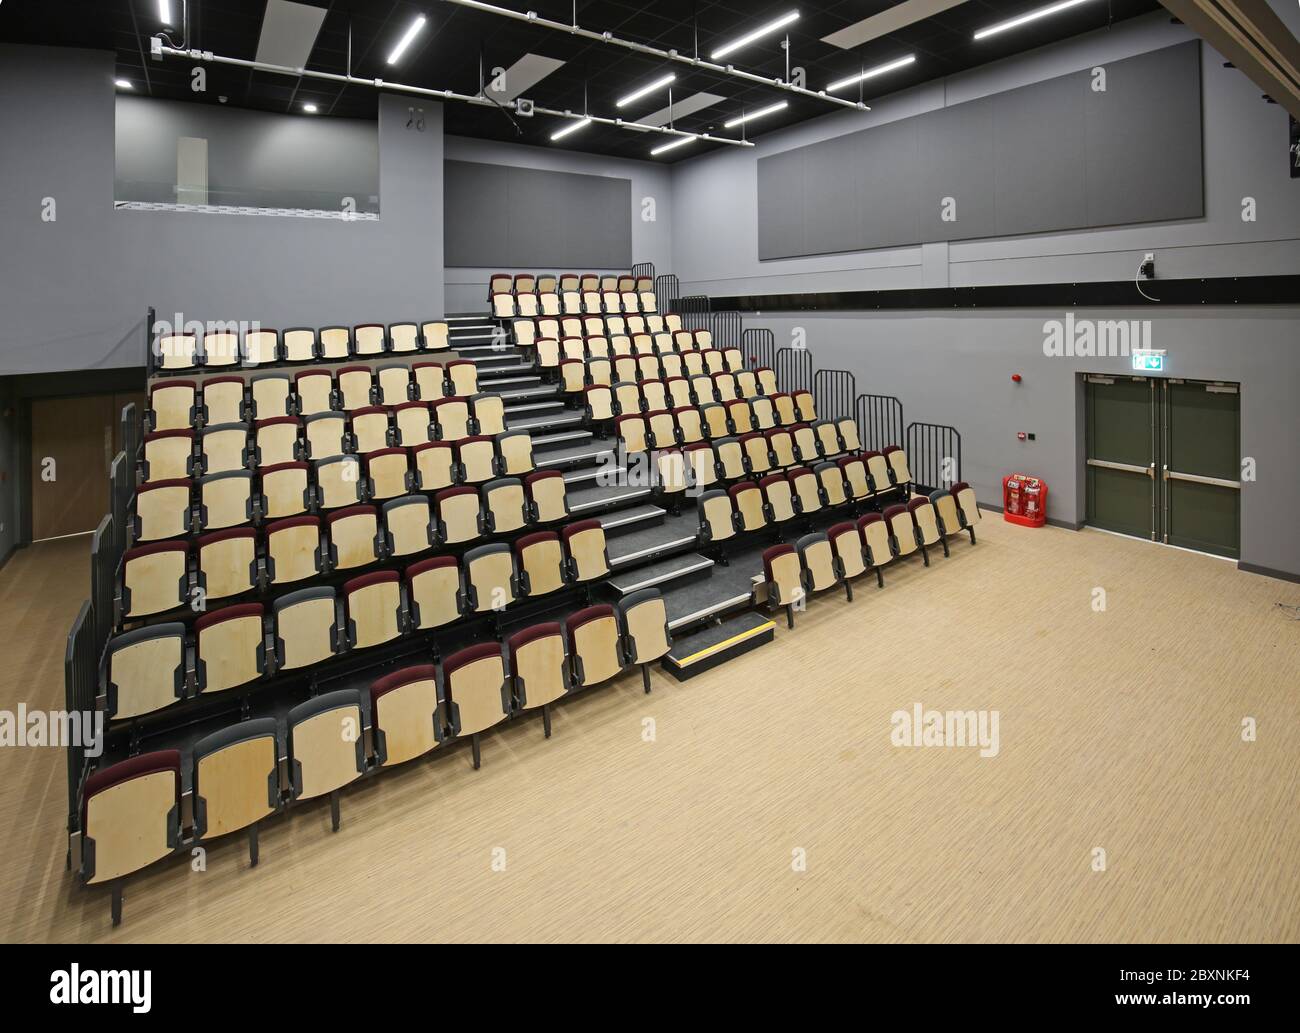 Retractable bleacher seating in a newly built school hall in south London, UK. Shows system fully extended giving 9 rows of tiered seating. Stock Photo